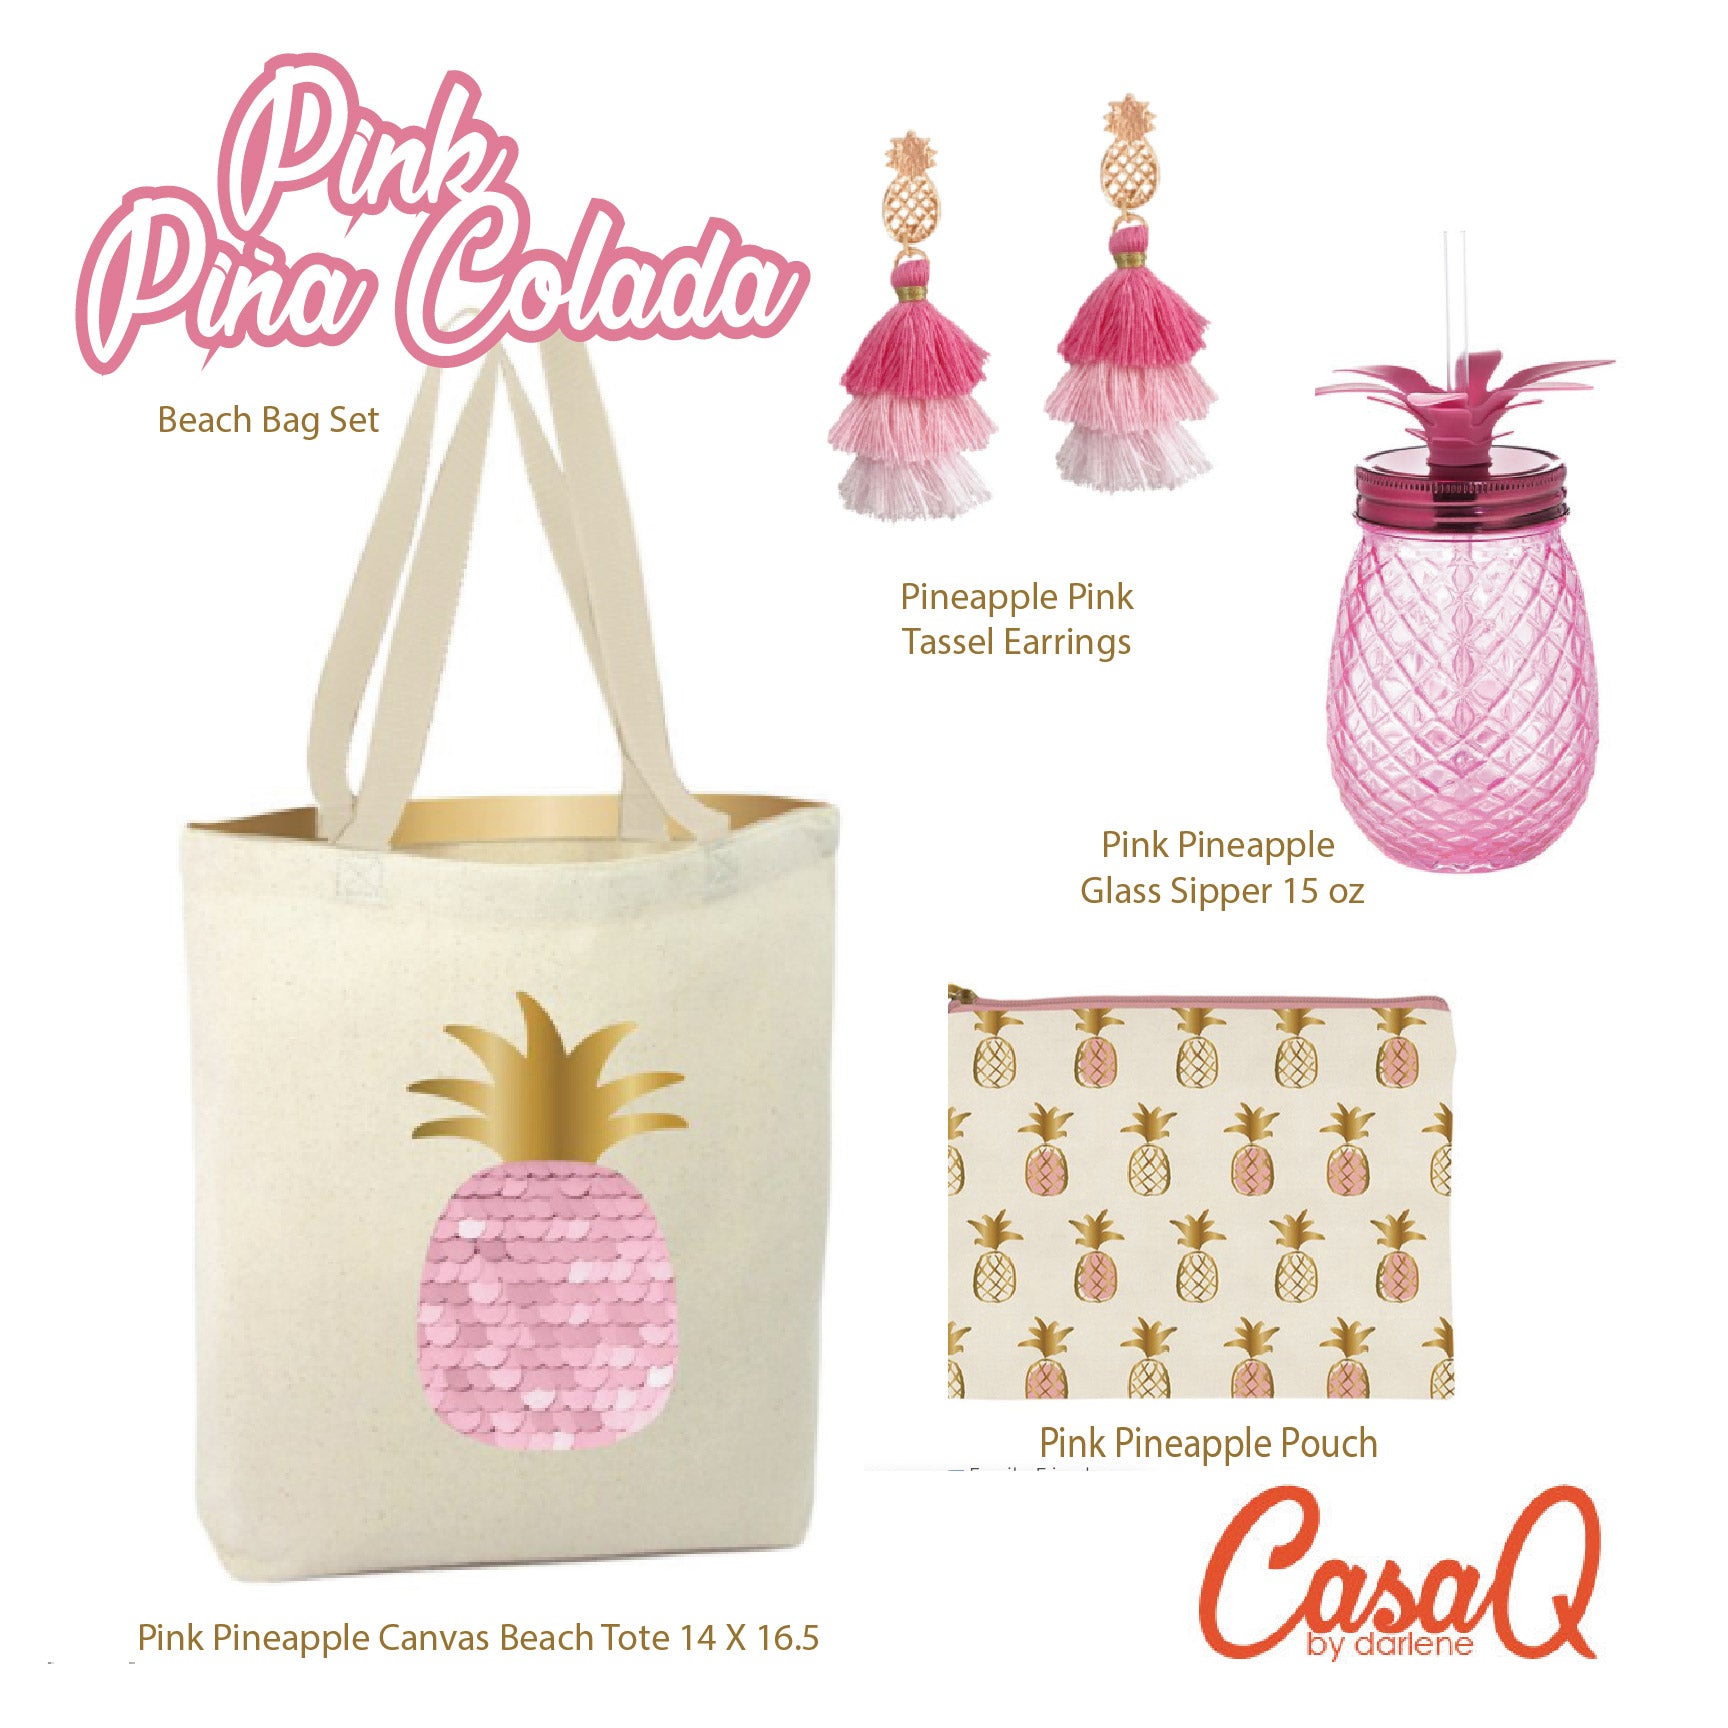 Beach bag gift ideas: 20 items for the perfect set! - The Beach Muse